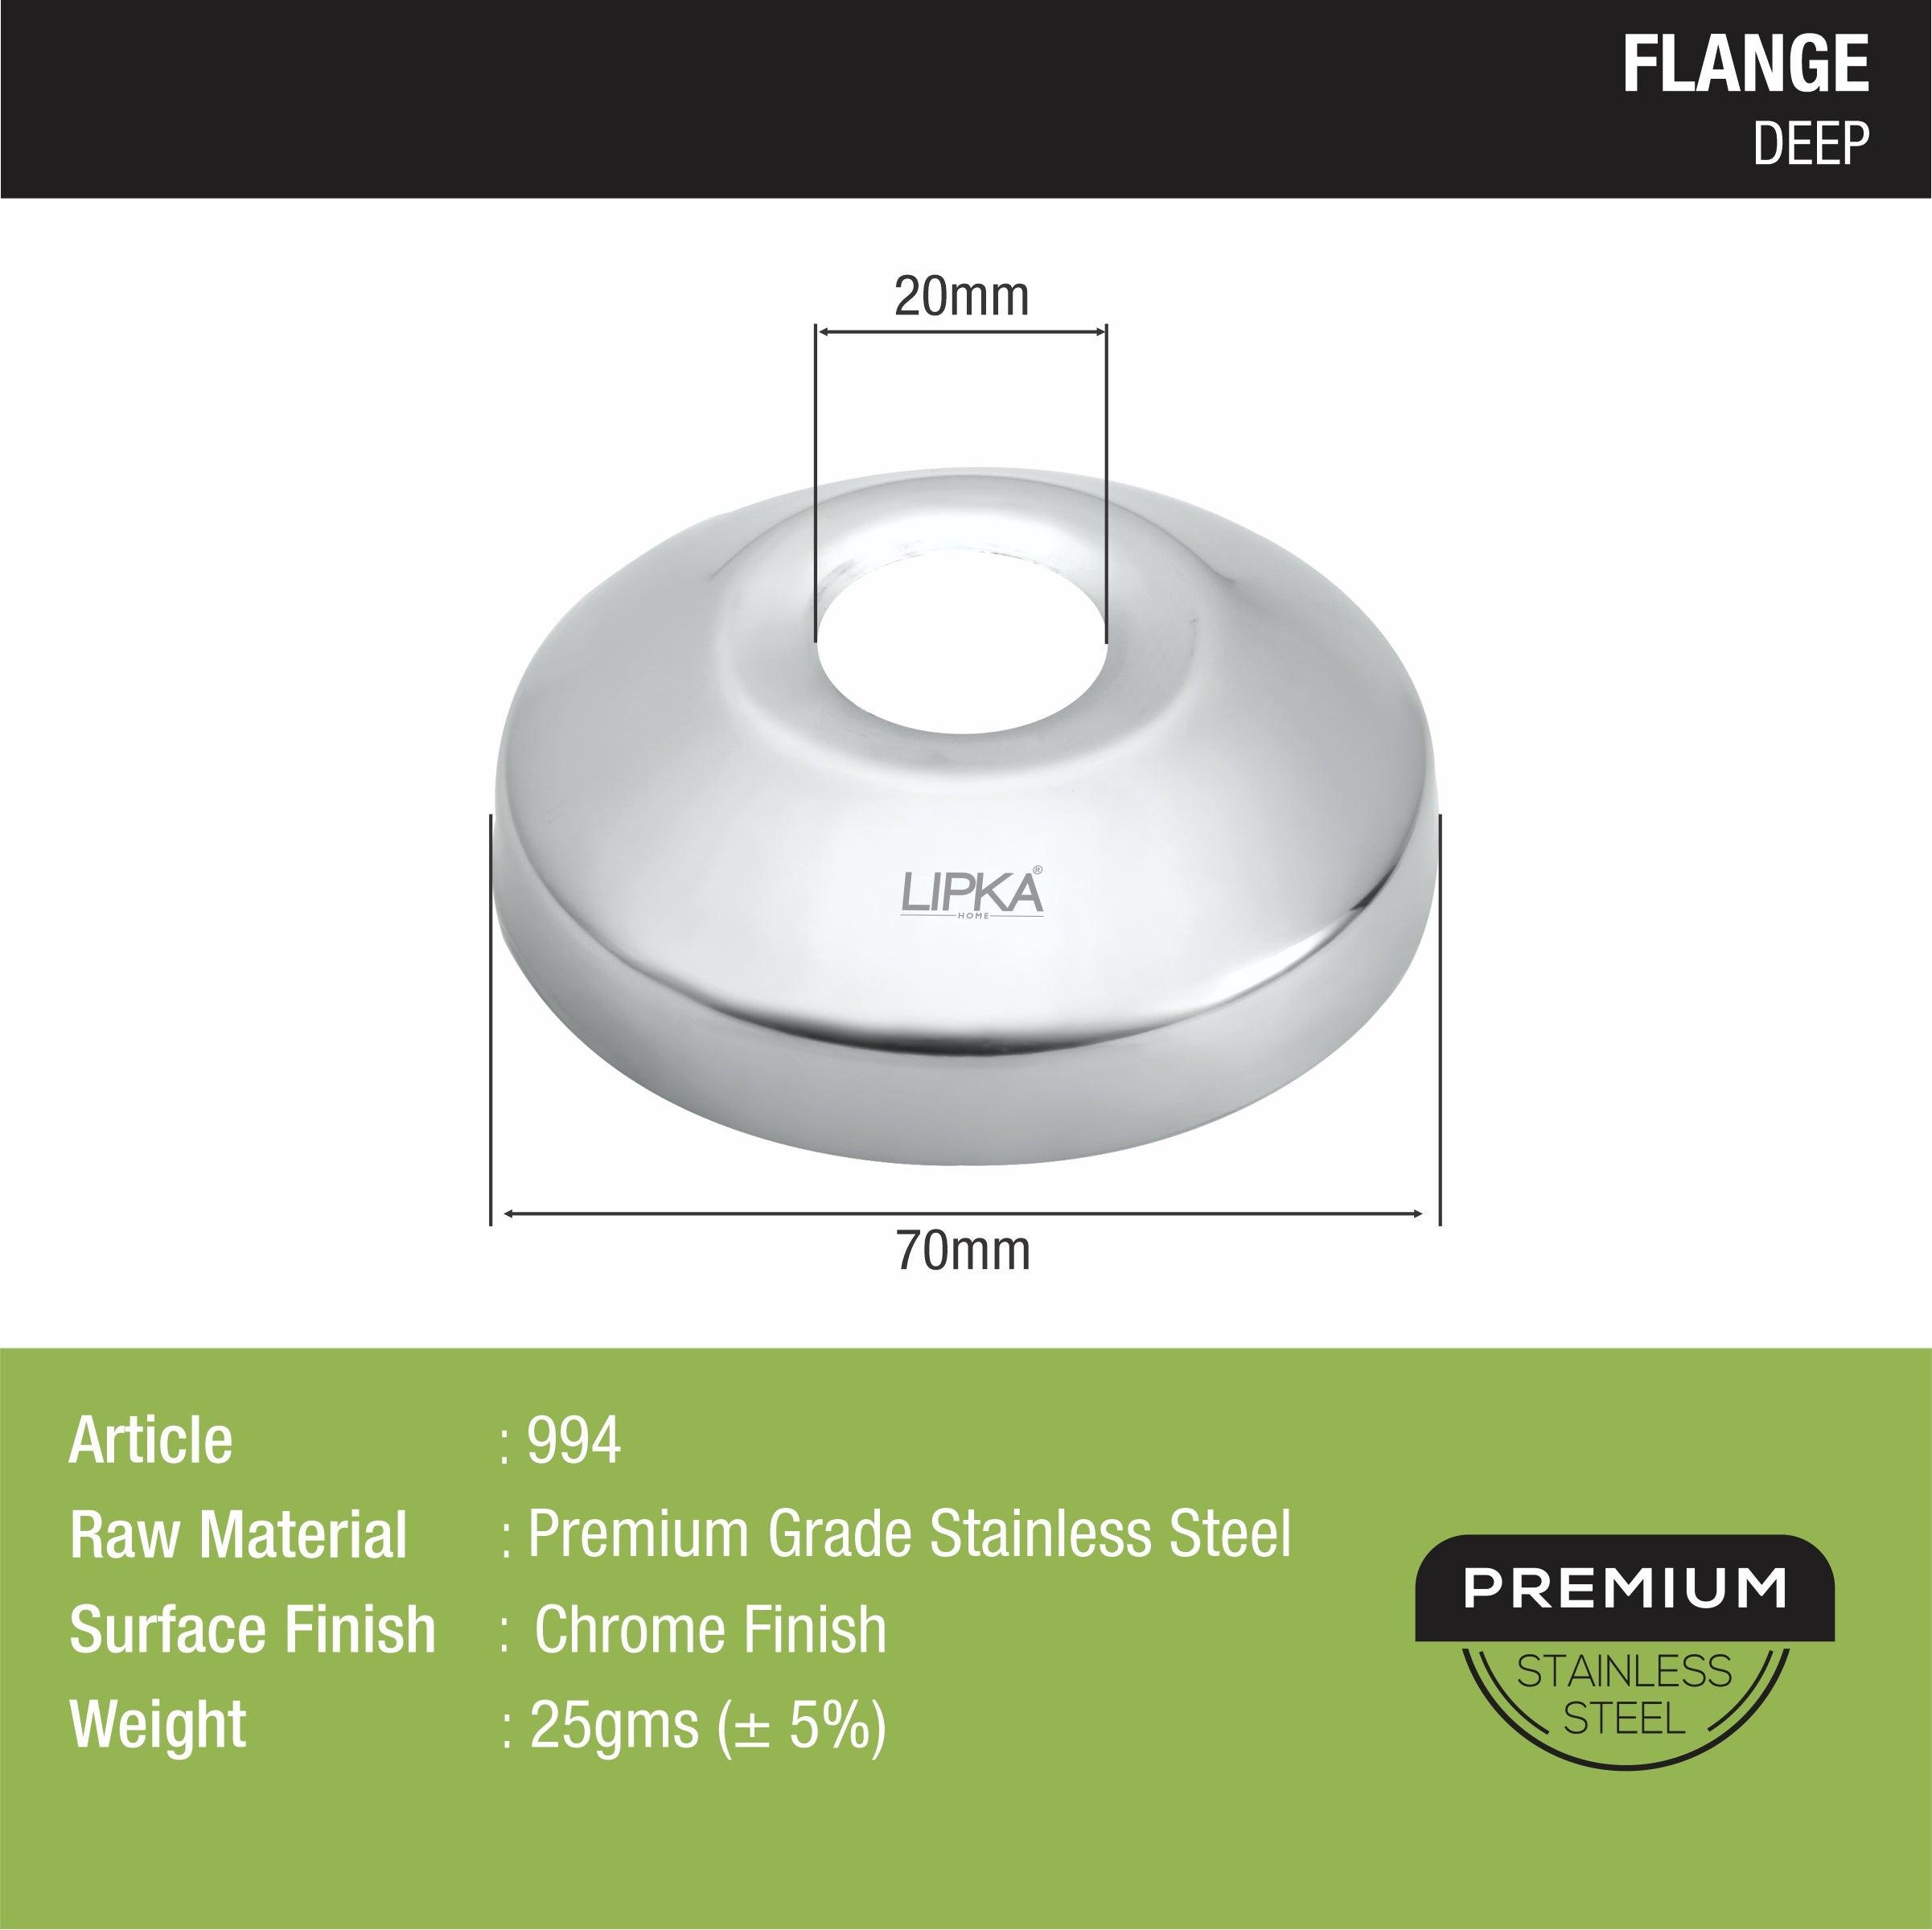 Deep Flange sizes and dimensions